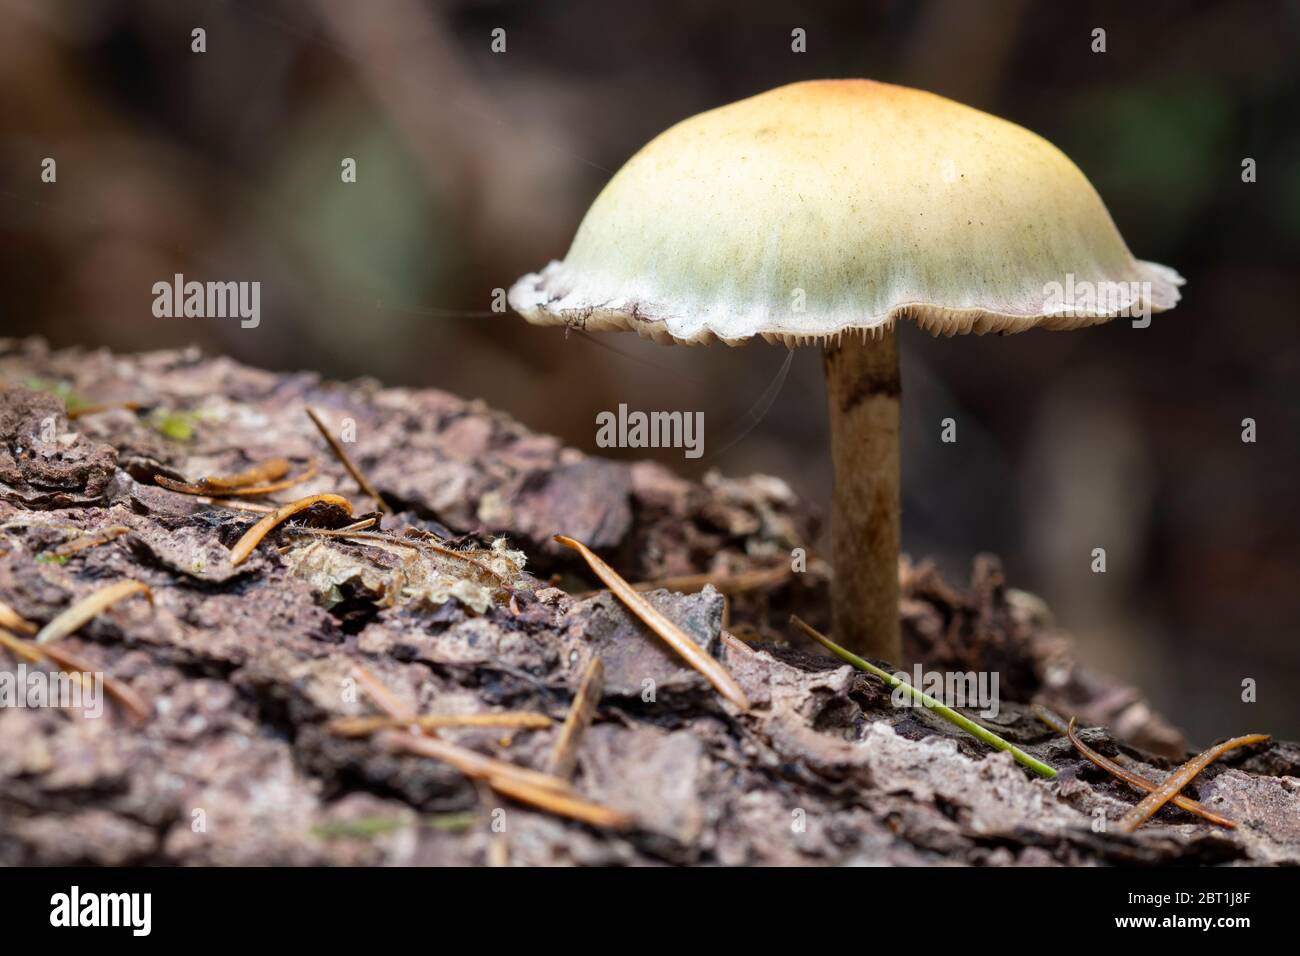 Very small mushroom sprouting from a log in a forest in the Pacific Northwest. The fungus is surrounded by pine needles. Stock Photo